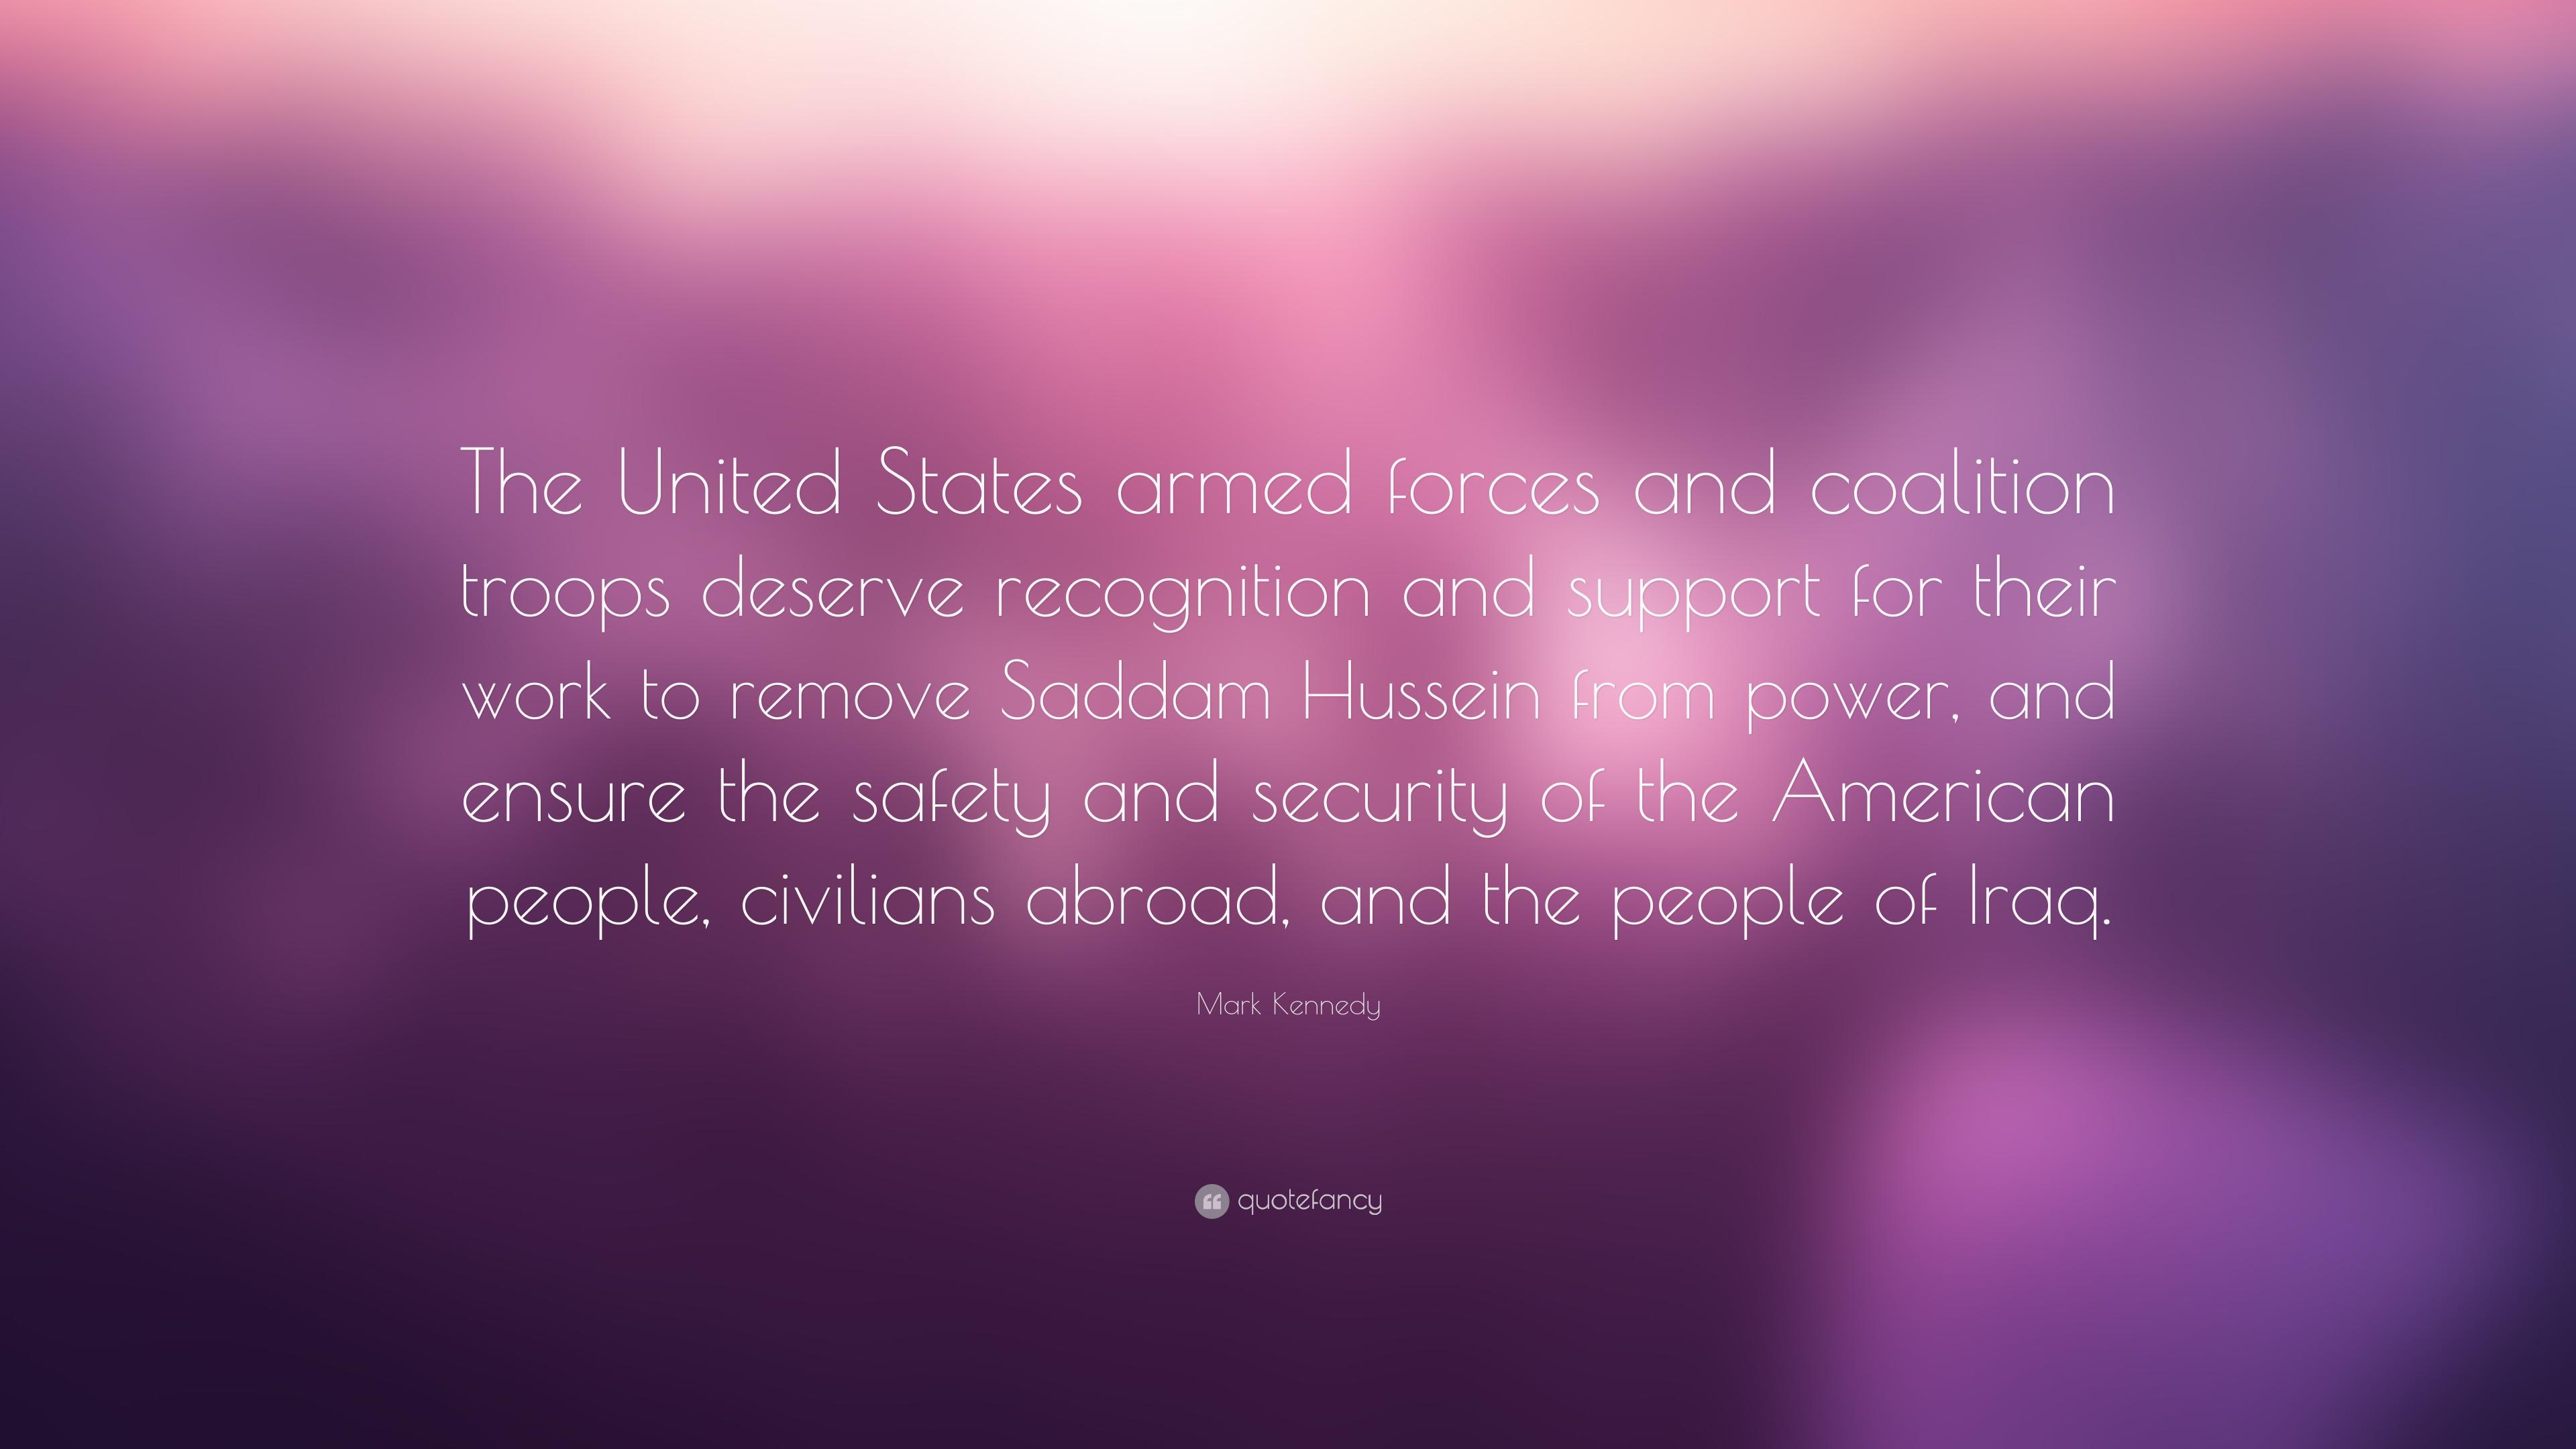 Mark Kennedy Quote: “The United States armed forces and coalition